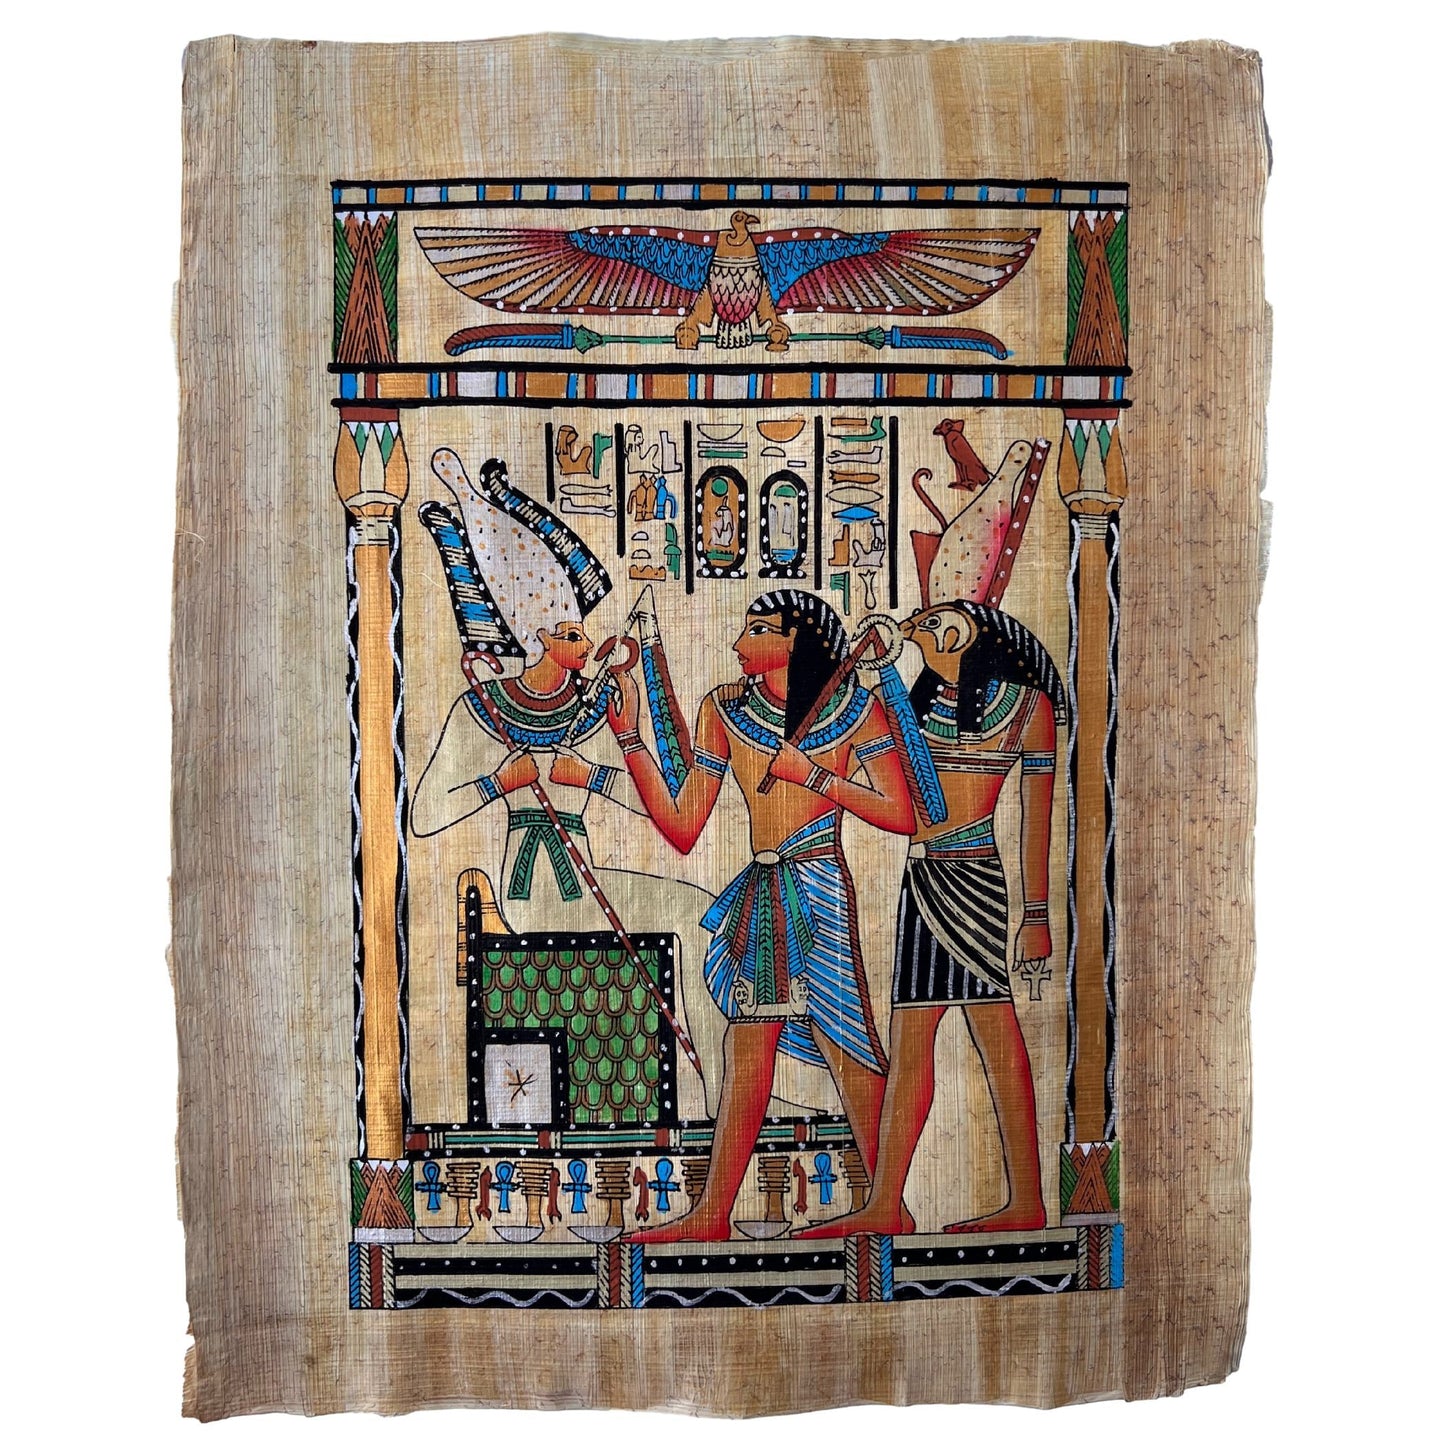 Osiris Lord of Gods, Pharaoh and God Horus Ancient Egyptian Genuine Hand Painted Papyrus Painting Art